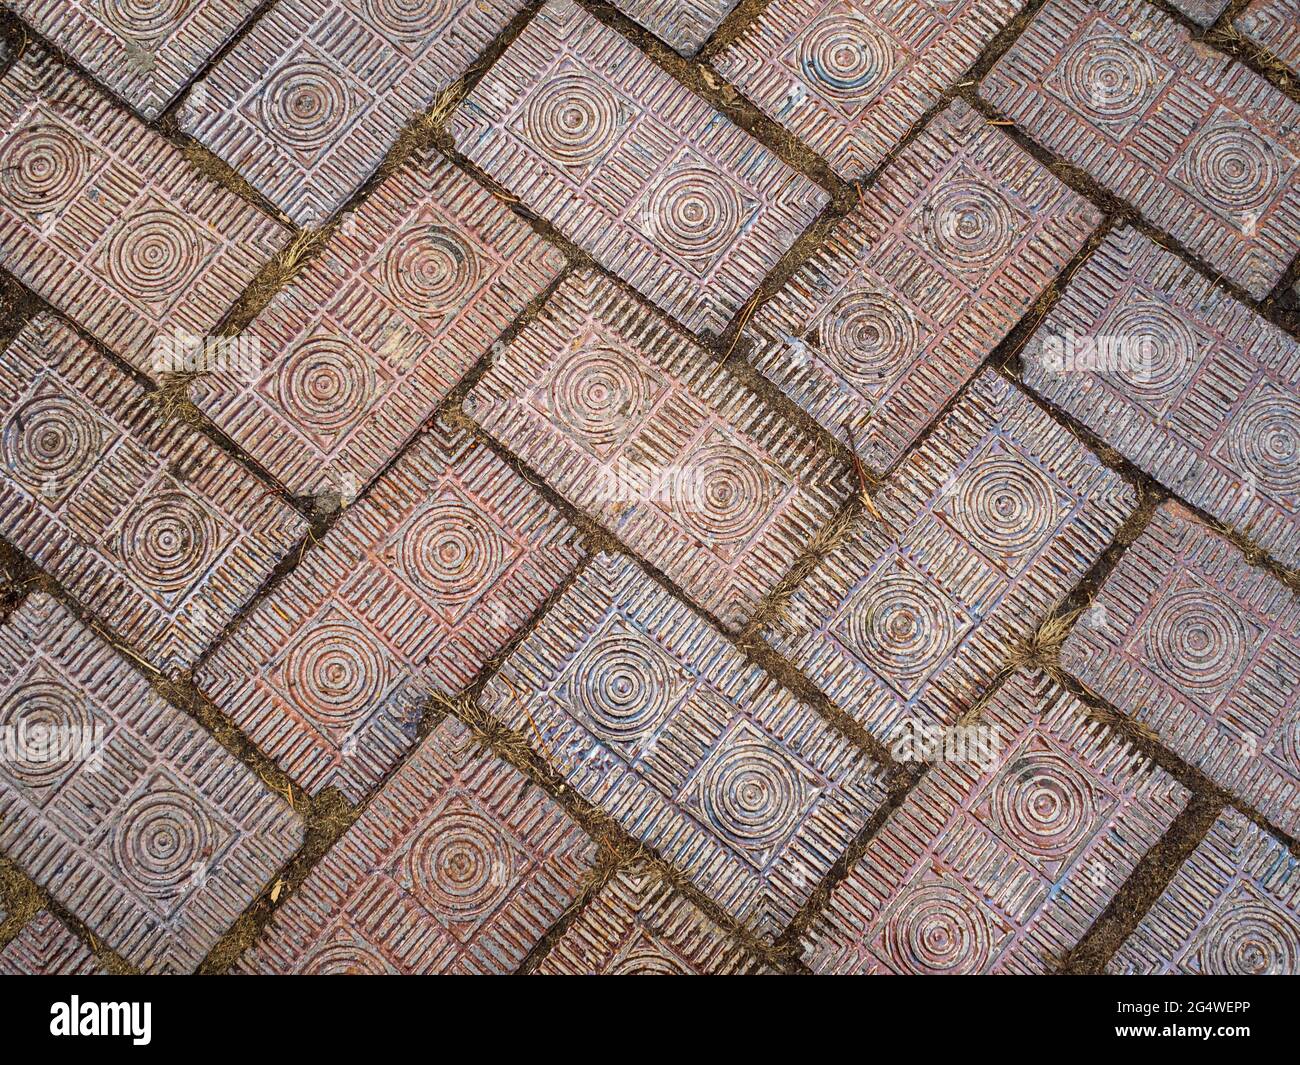 Fancy brick pavers with carved decorative concentric circles and lines in a herringbone pattern along a walkway in Columbus, Ohio. Stock Photo